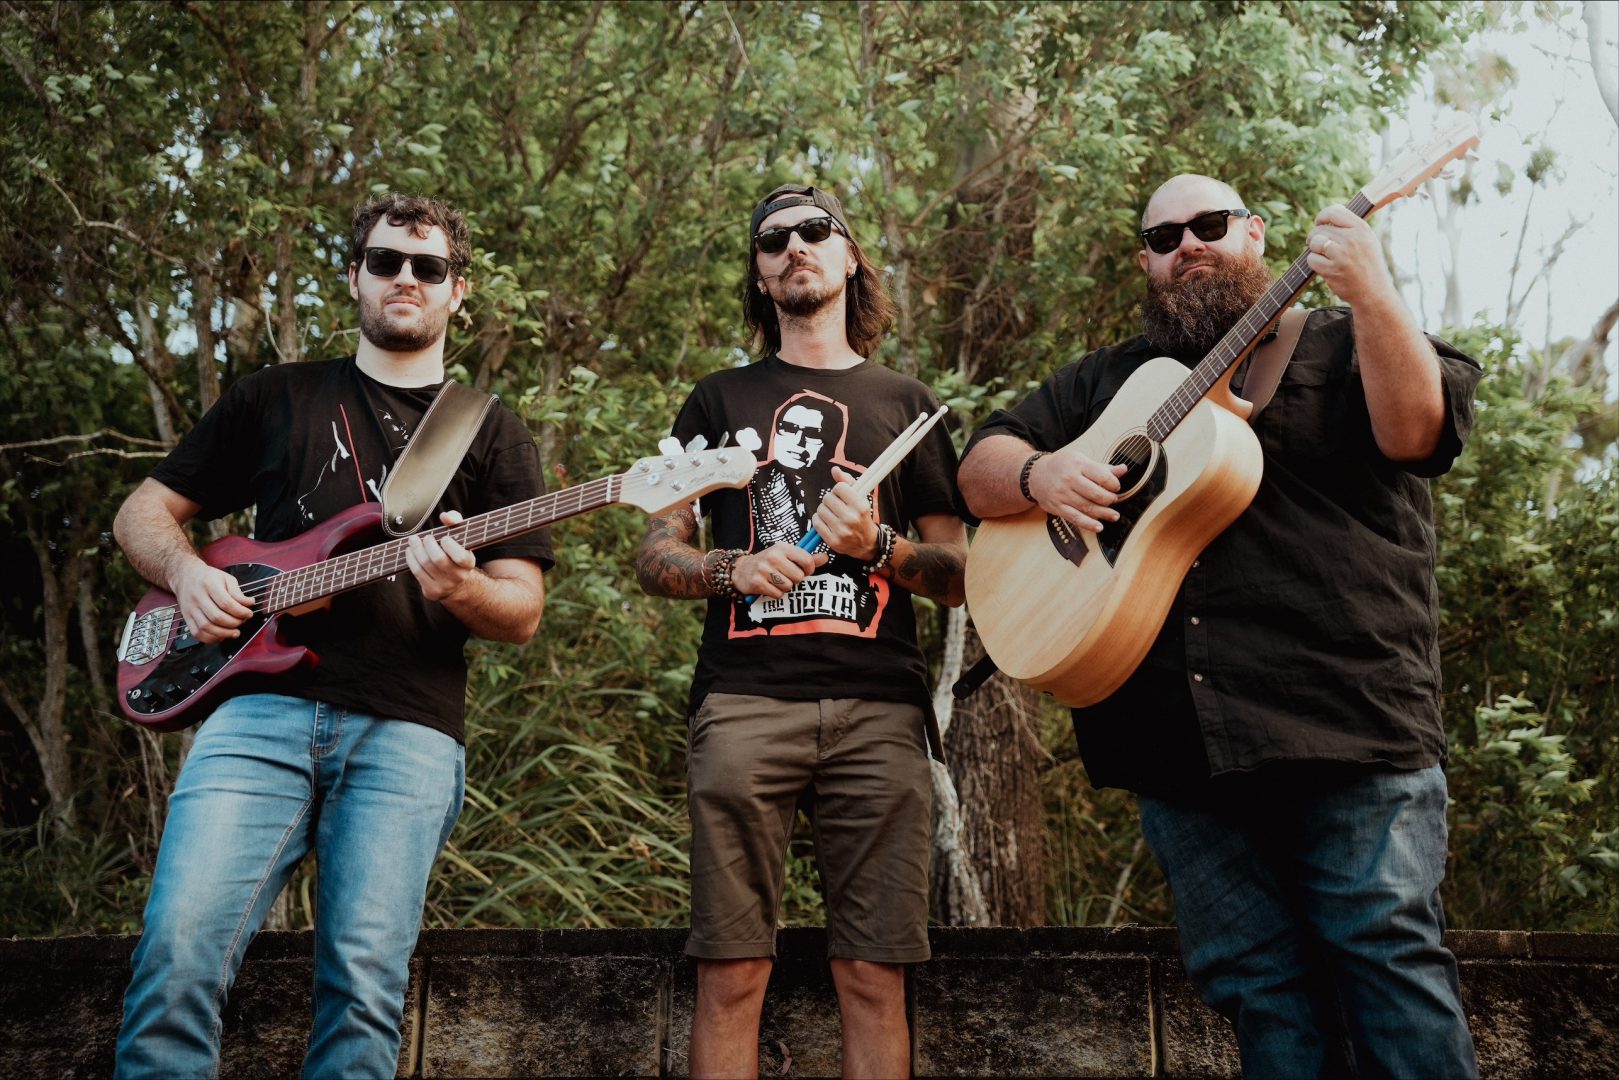 On the local music scene with – The Lowdown